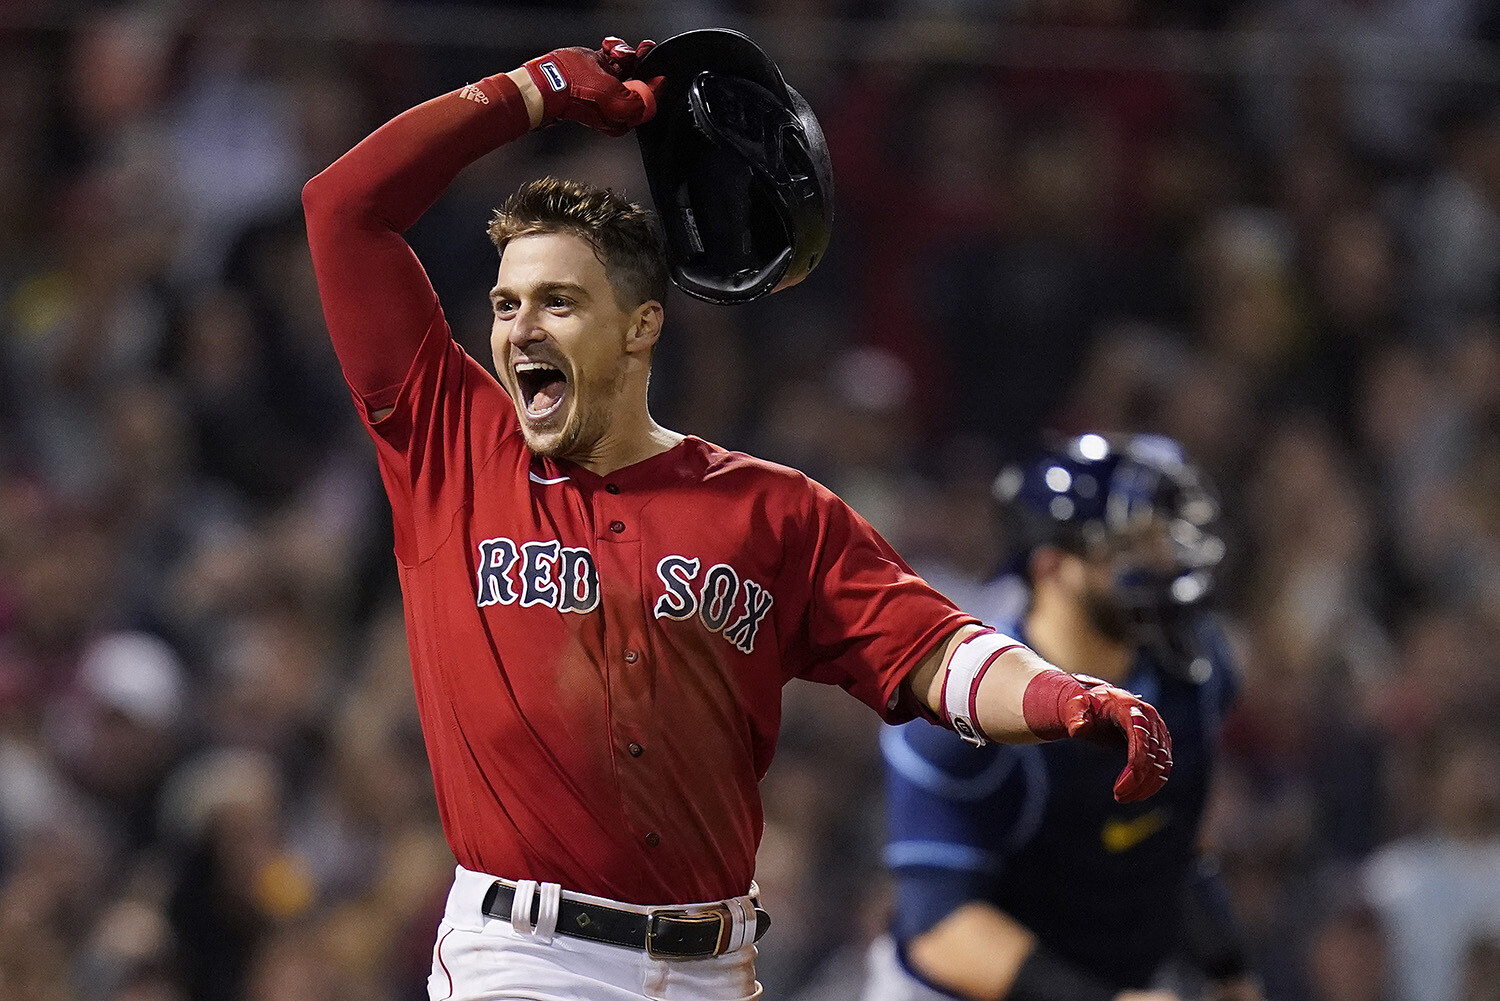 Boston Red Sox eliminate Tampa Bay Rays 6-5 with late sac fly